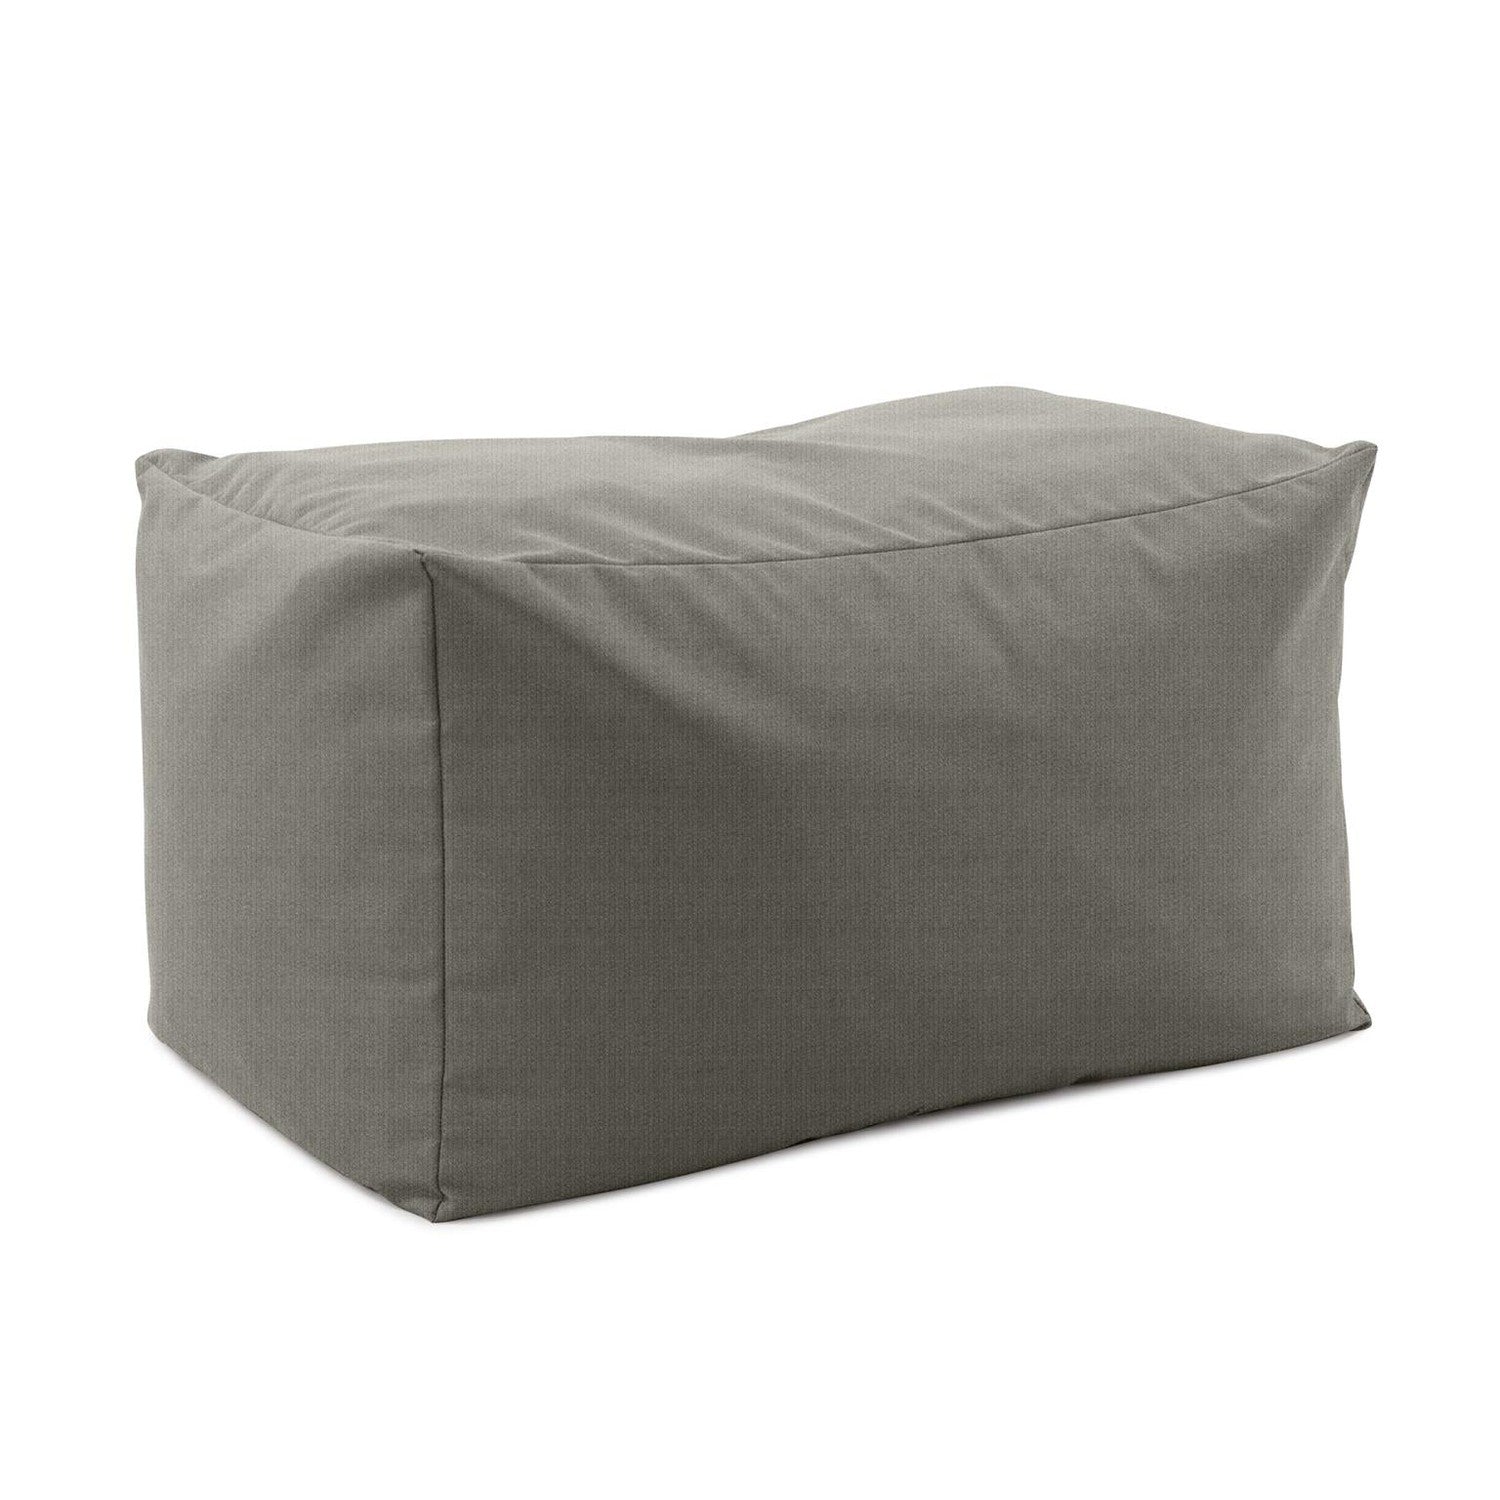 Outdoor Pouf Bench-The Howard Elliott Collection-HOWARD-Q876-1334-BenchesDriftwood Sand-Polyester-8-France and Son